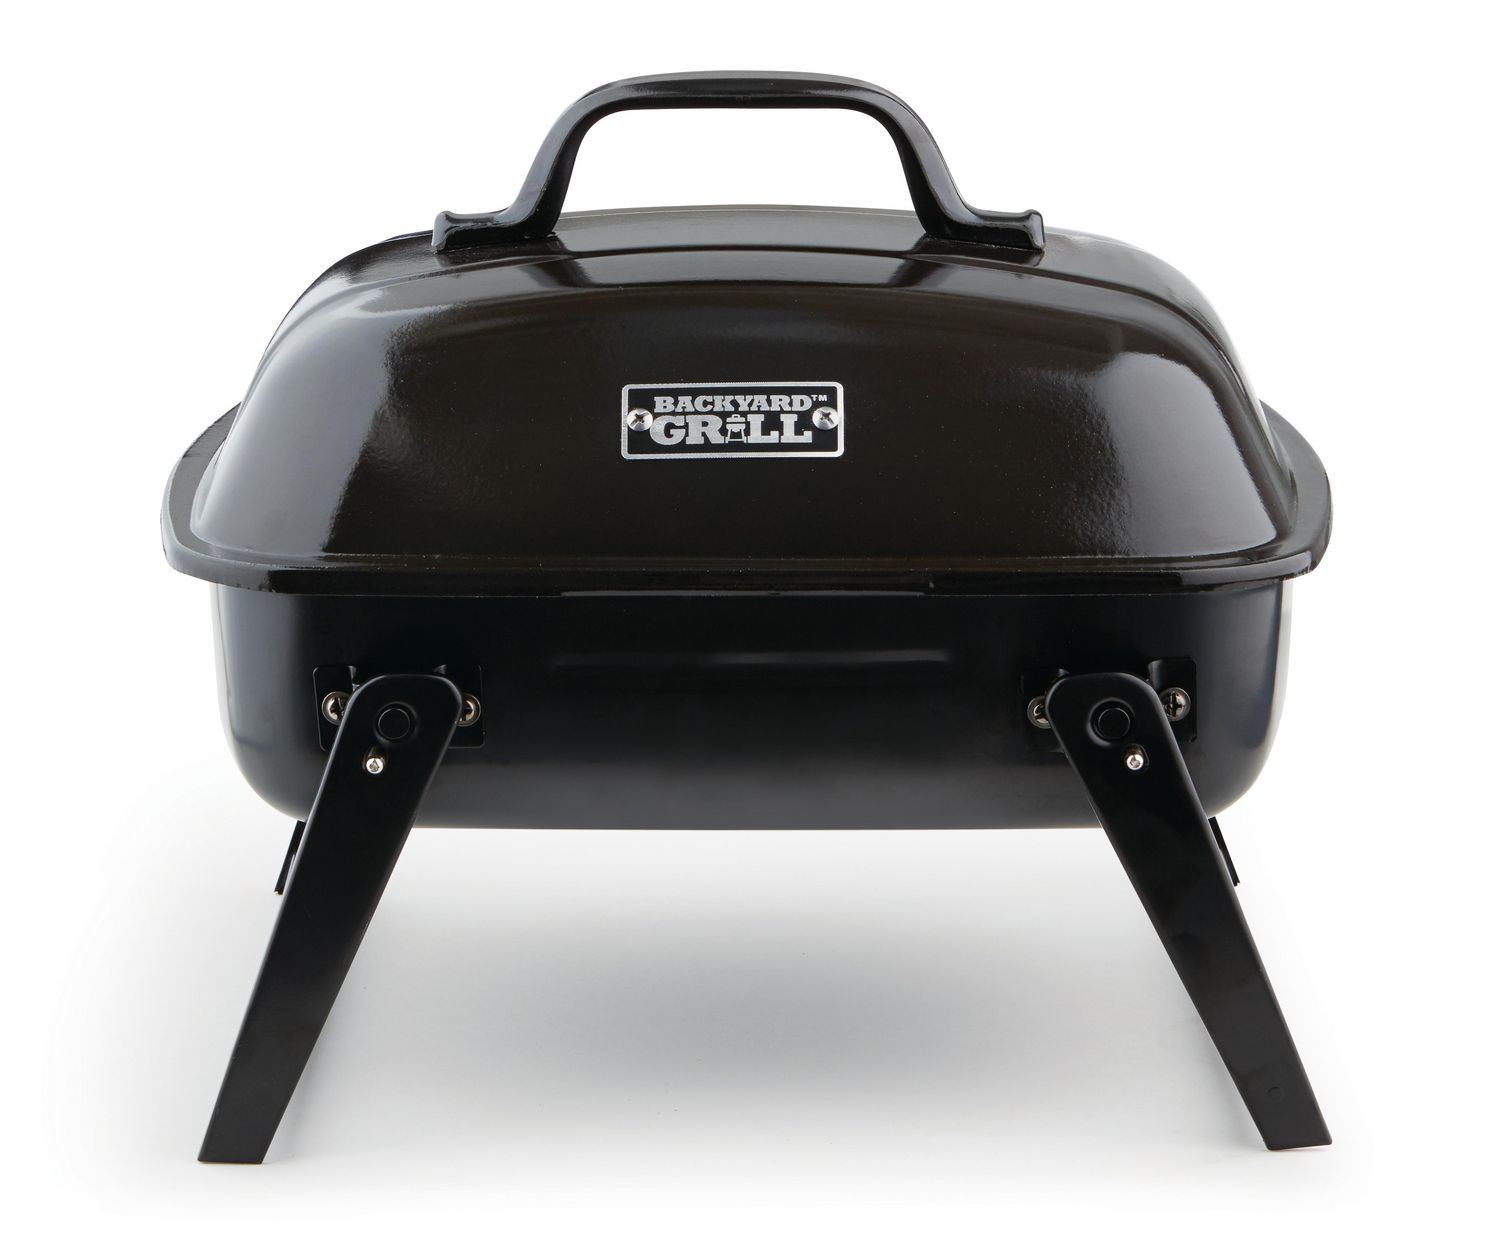 Backyard Grill Portable Charcoal Grill - 999999 628915411911